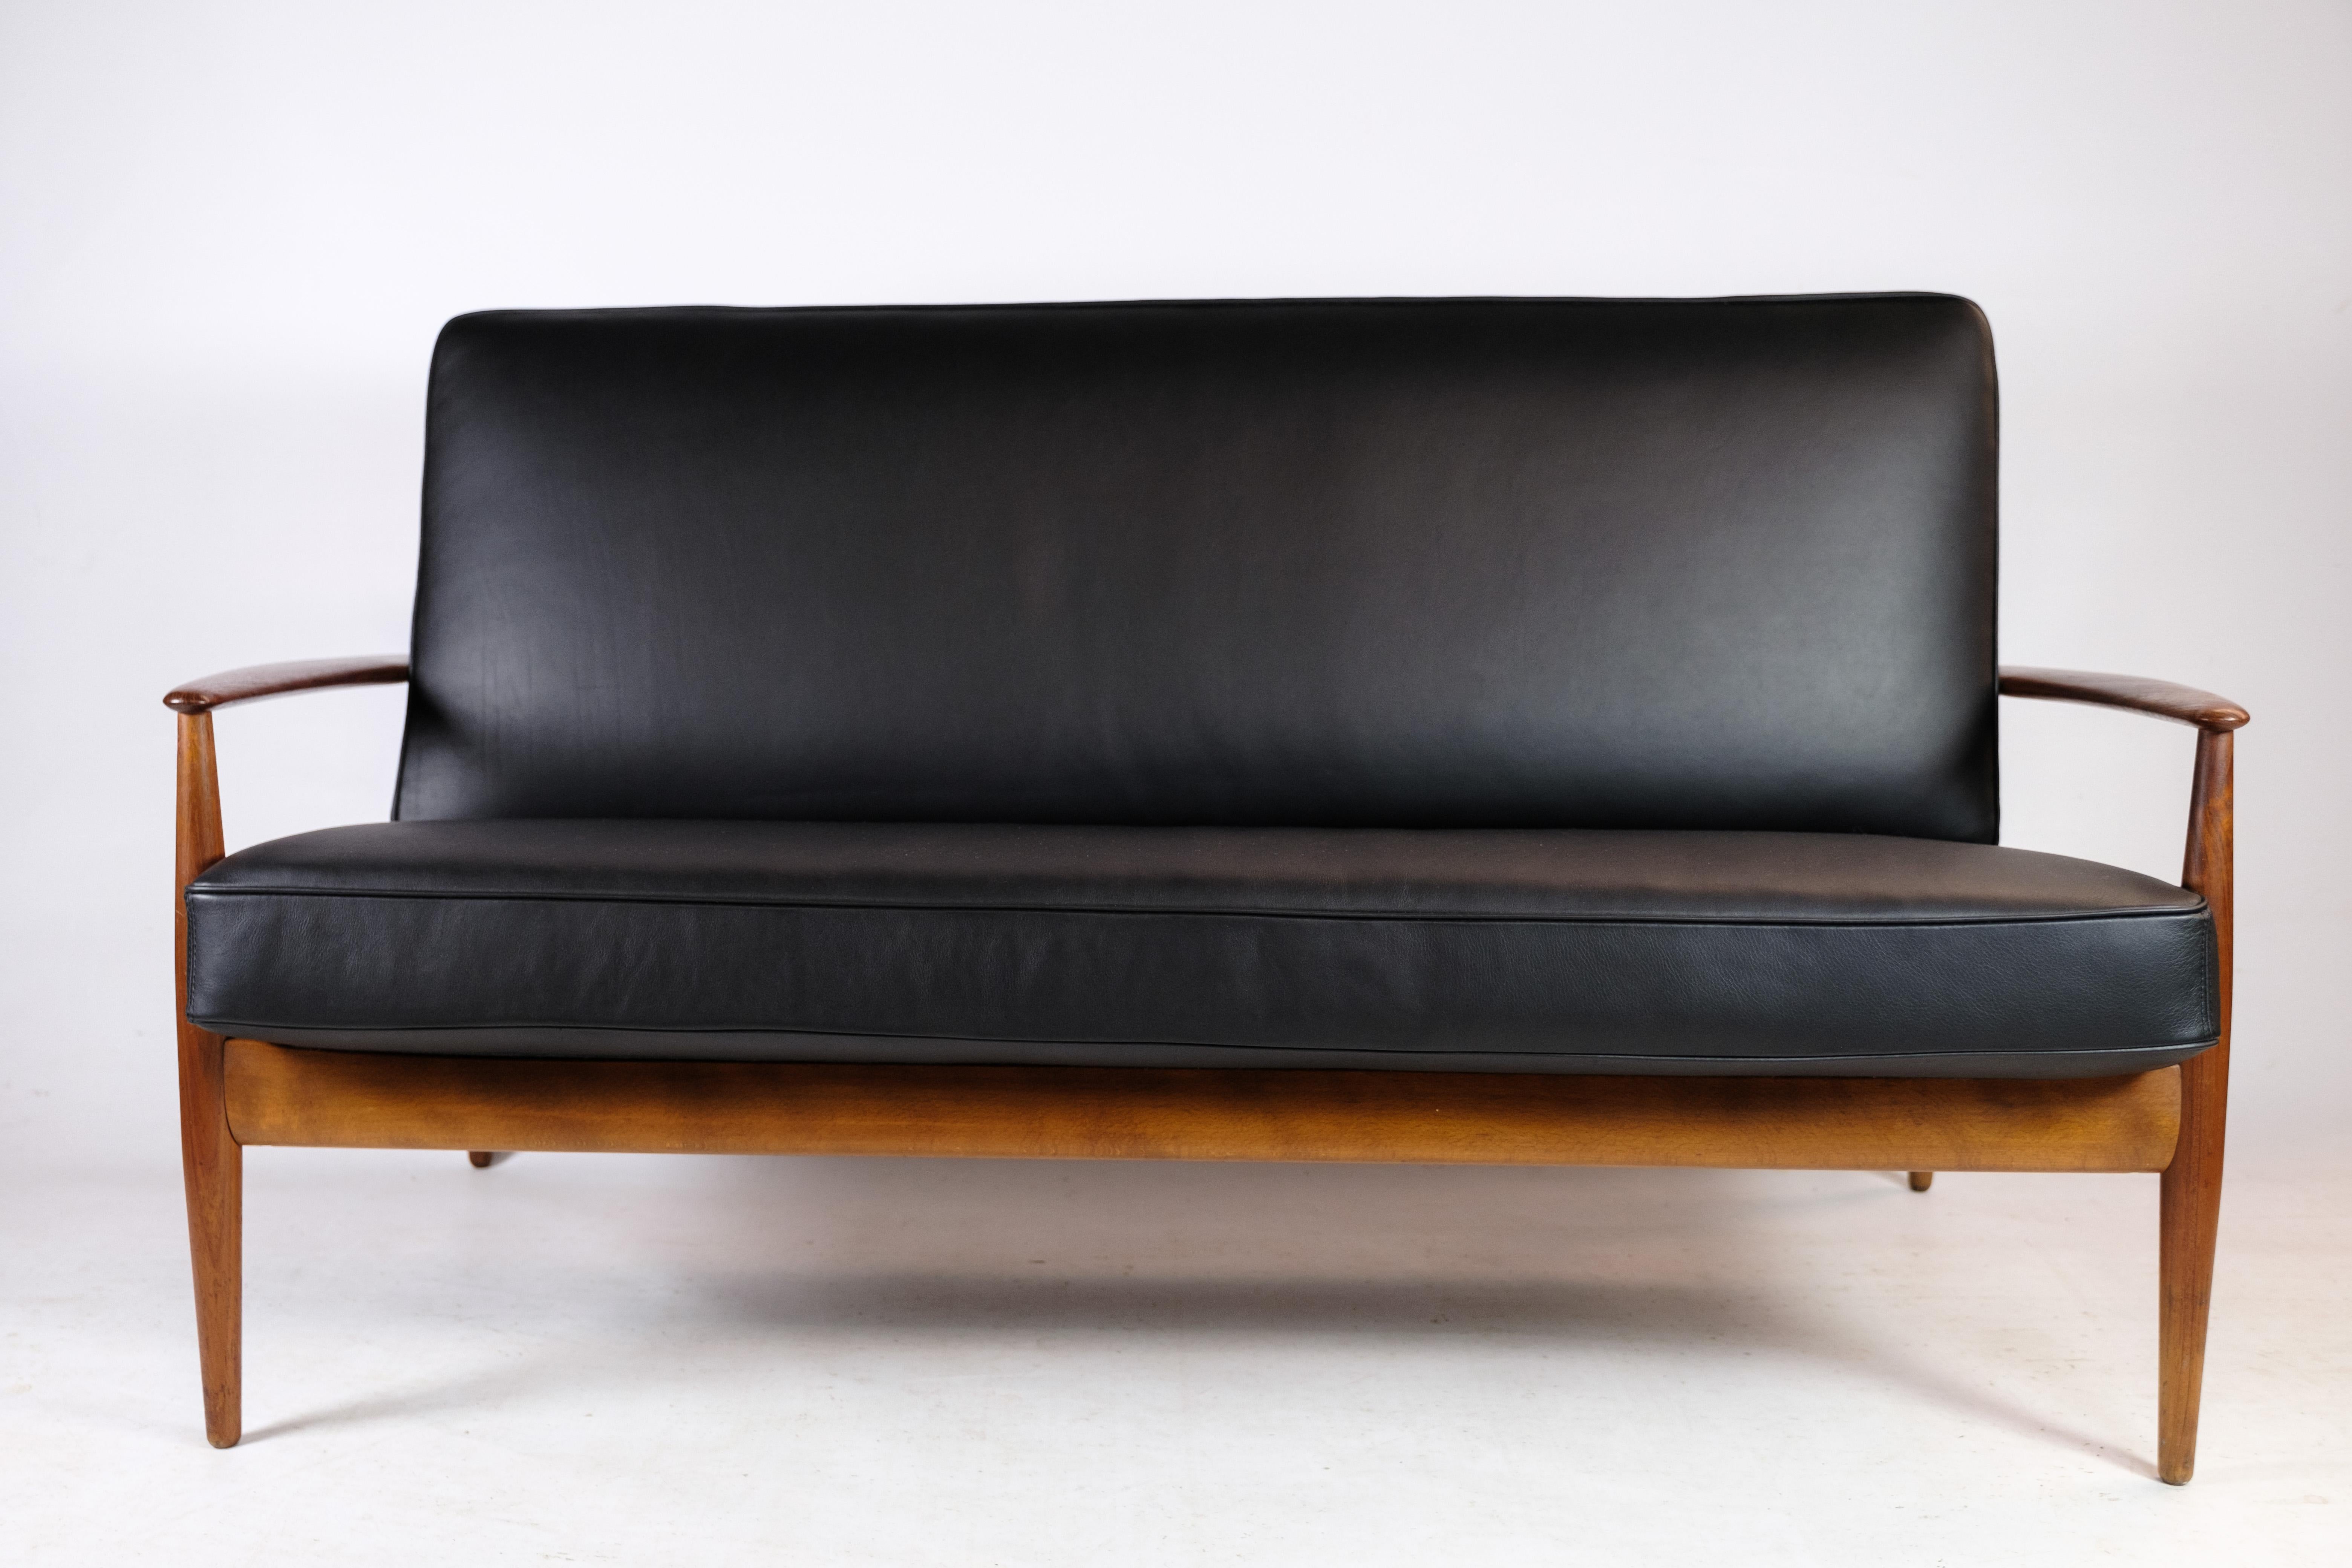 Mid-Century Modern 2 Seater Sofa Model 118 Made With a Teak Frame By Grete Jalk From 1960s For Sale